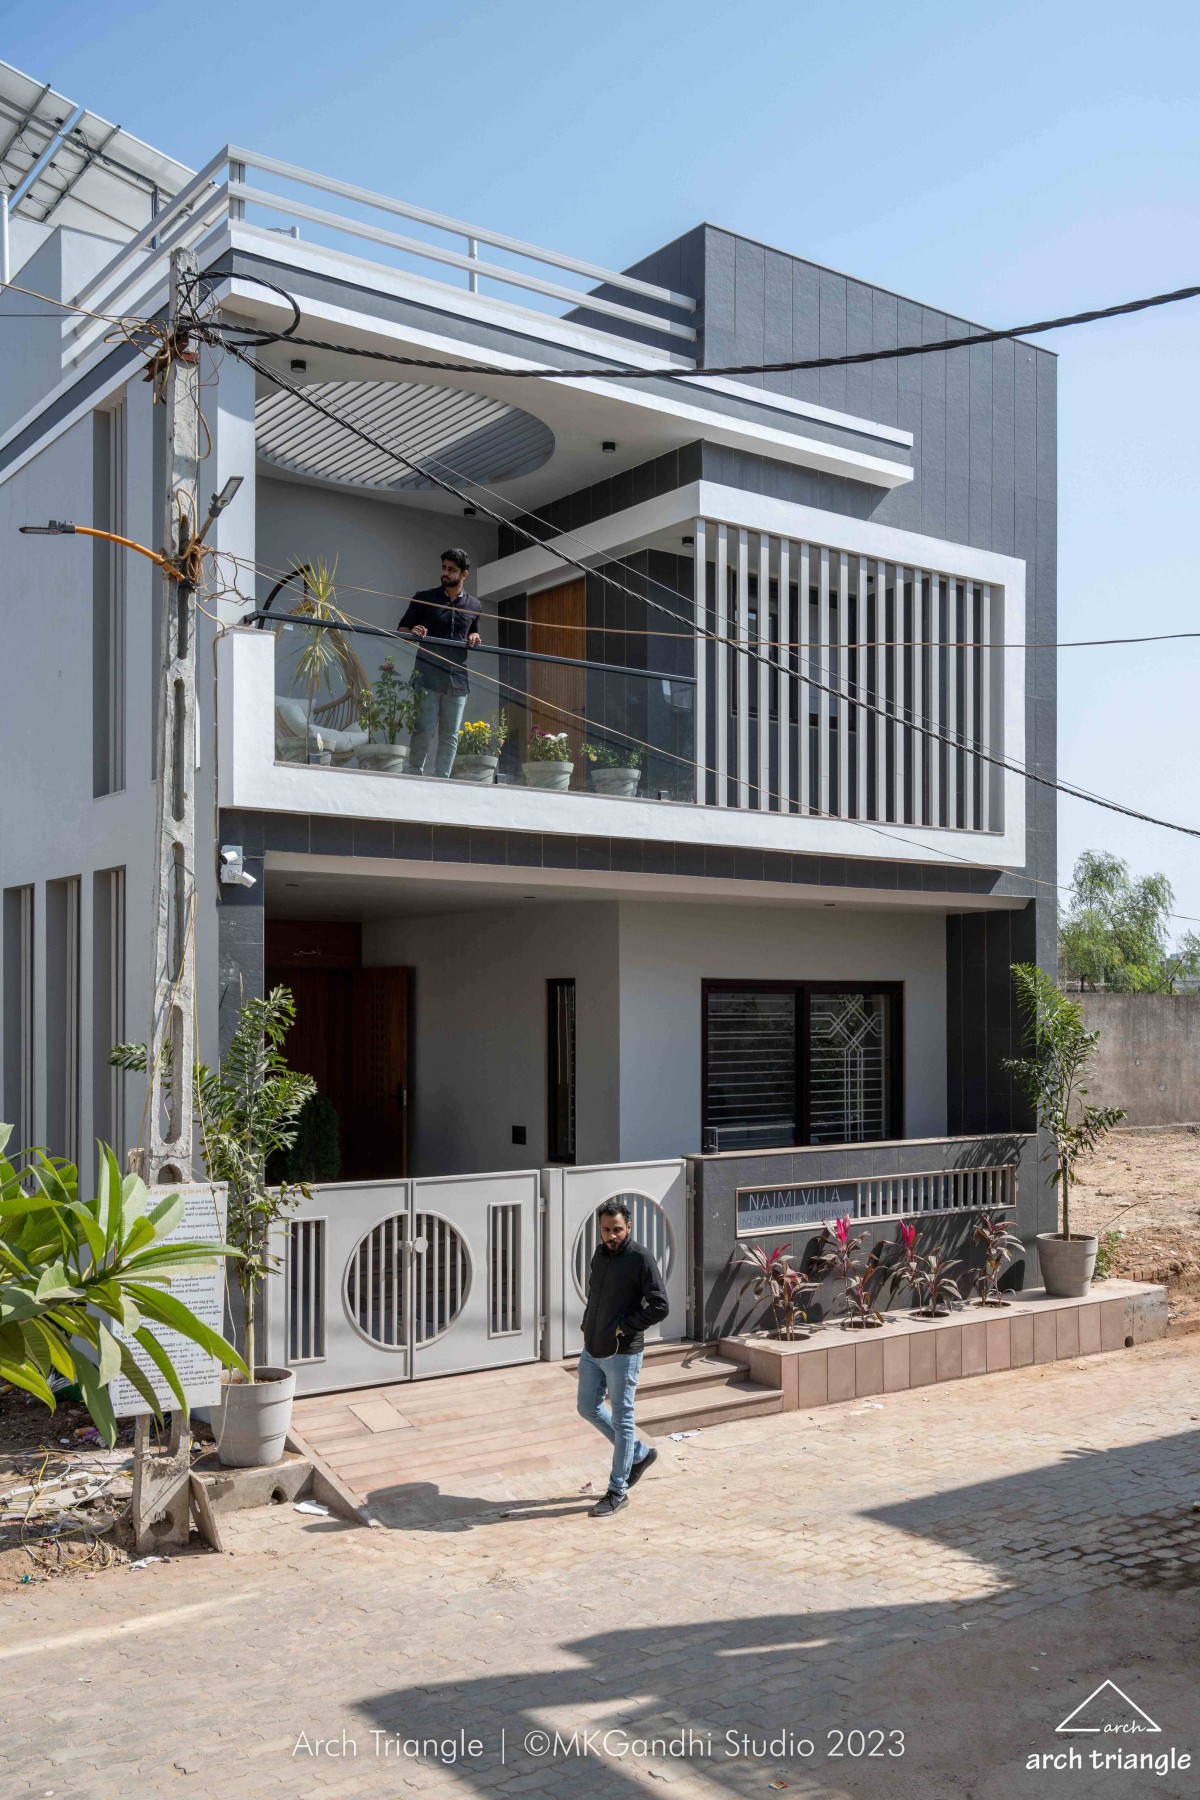 Exterior view of Jiruwala Residence by Arch Triangle